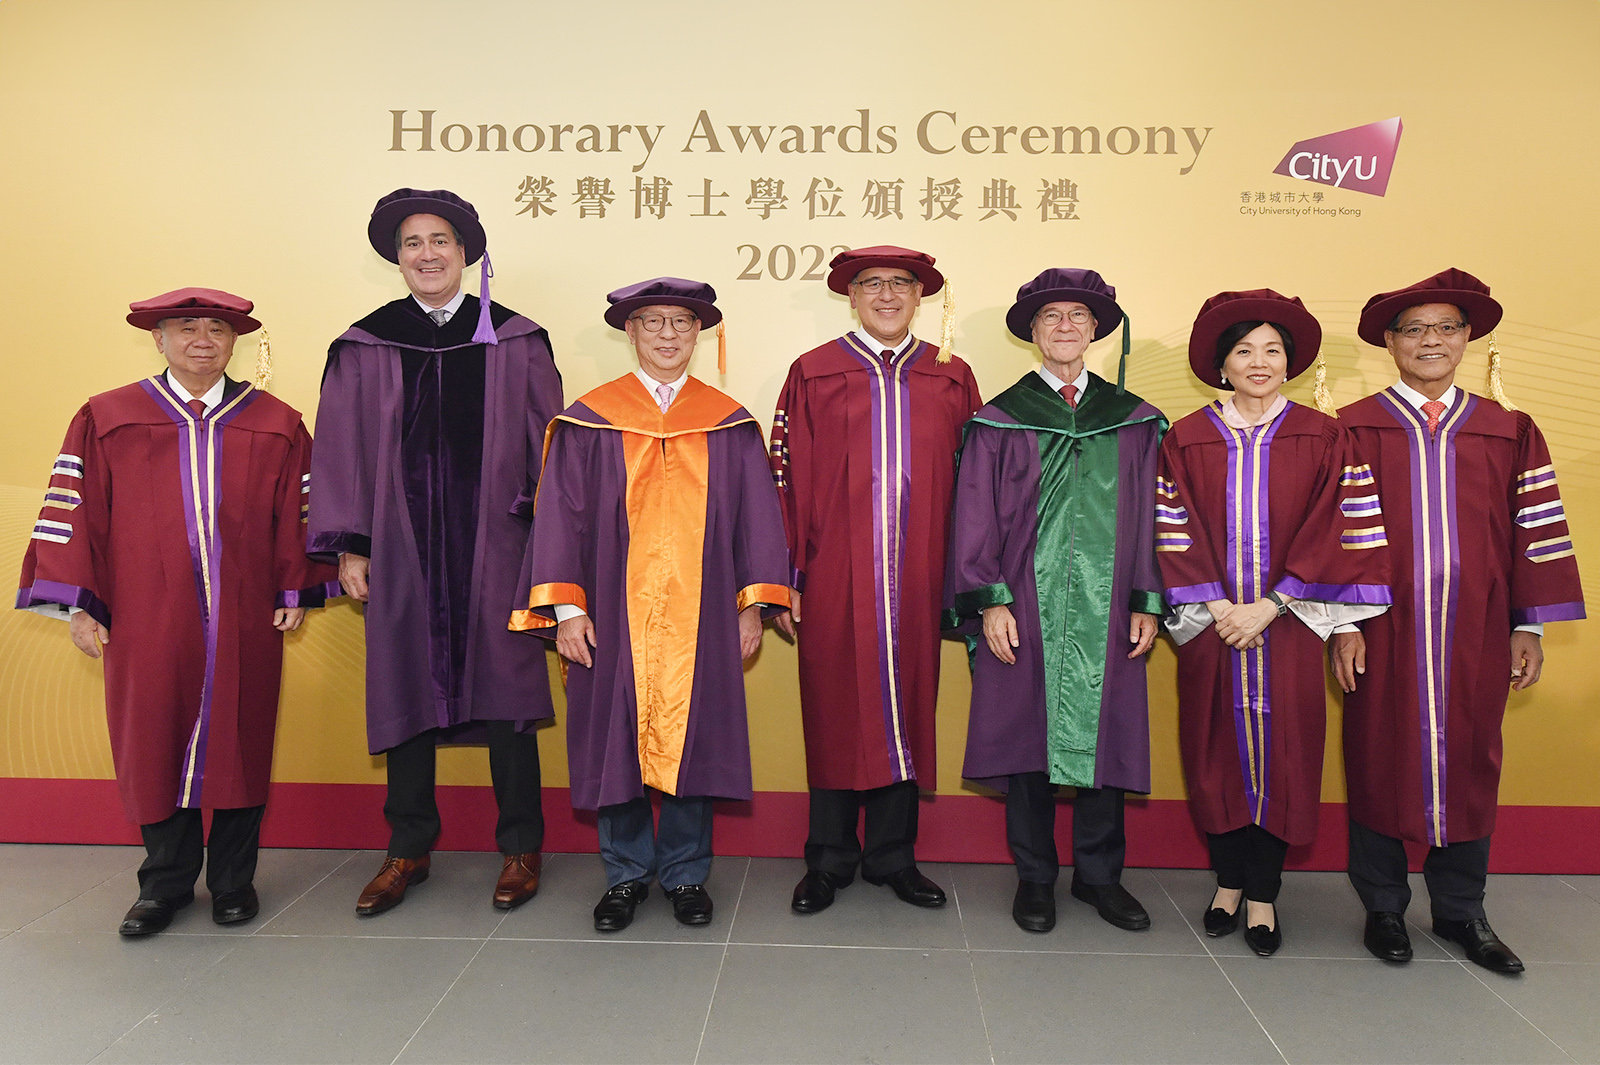 (From left) President Freddy Boey, Professor Chad A. Mirkin, Dr Roy Chung Chi-ping, Mr Lester Garson Huang, Professor Jeffrey D. Sachs, Ms Lilian Chiang Sui-fook and Mr Charles Chin Ying-on.